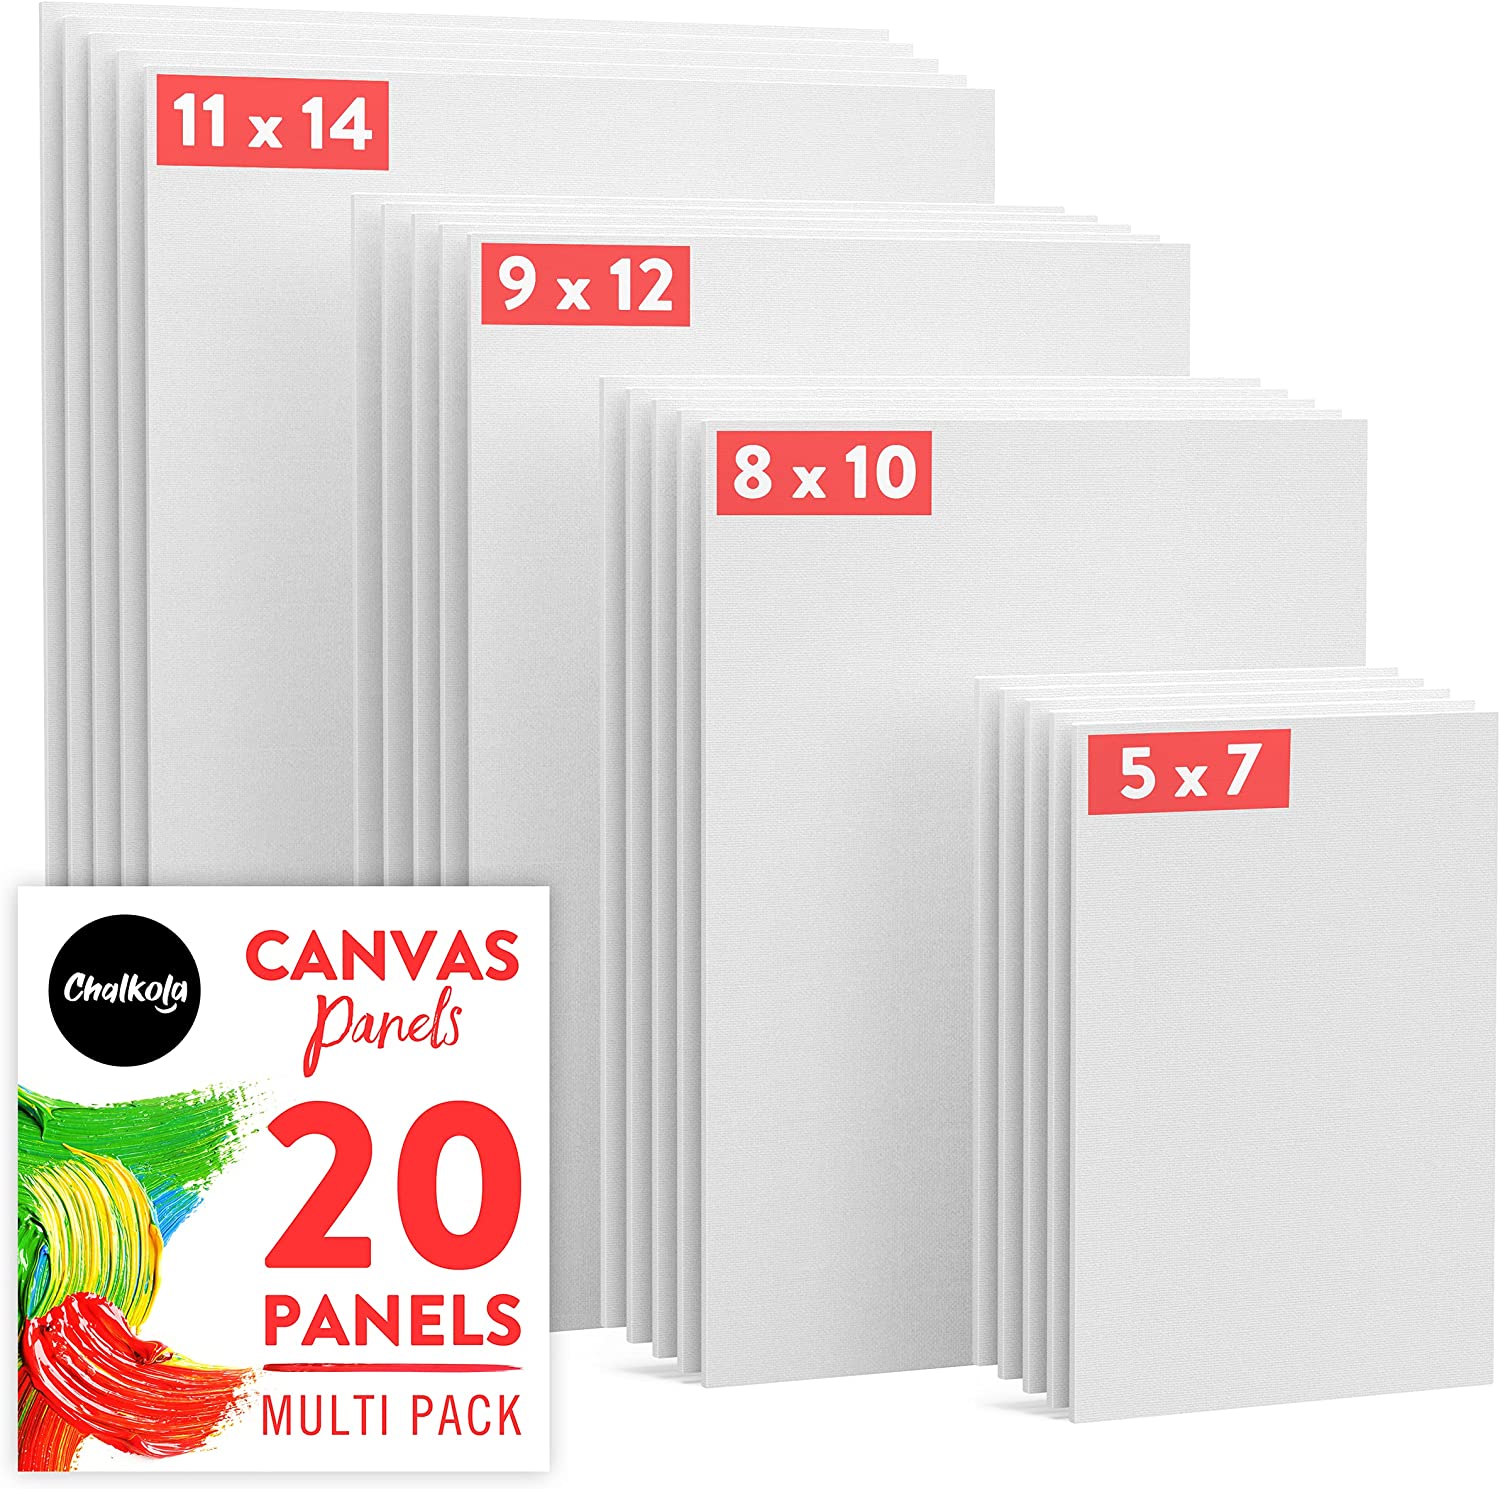 for Kids 100% Cotton White and MDF Board Core 8x10 Magicfly Blank Canvas Panel for Painting 5x7 Adults 9x12 Artist Pack of 28 with Label Stickers for Acrylic Oil Art Paint 11x14 